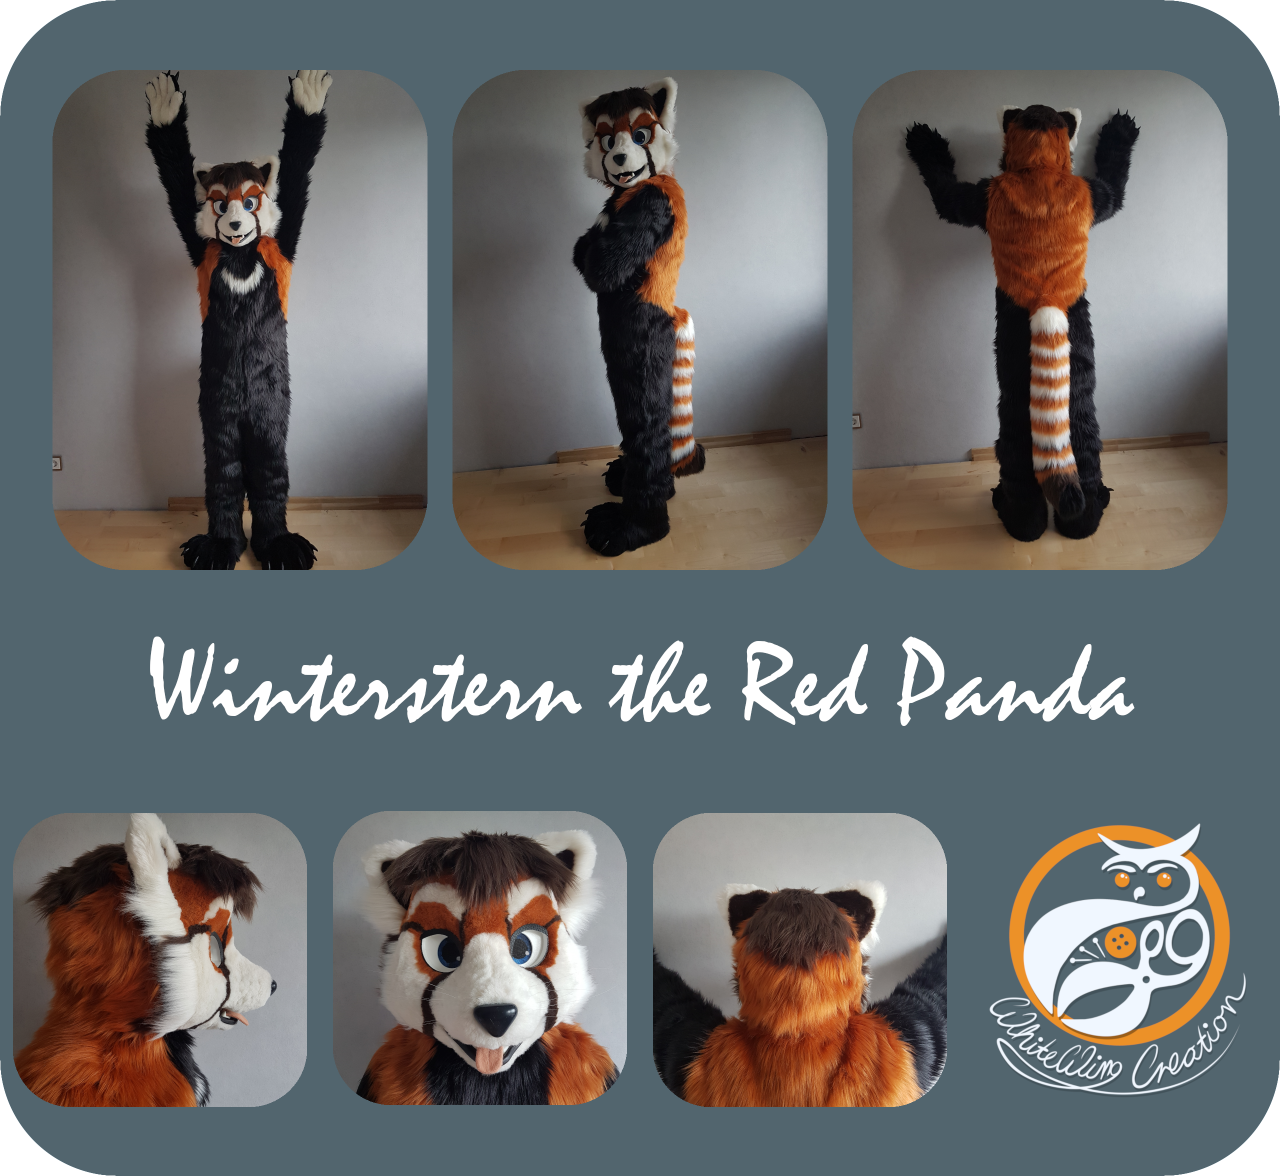 Winterstern Fotocollage - Full Fursuit made by WhitewingCreations - Fursuits made in Germany